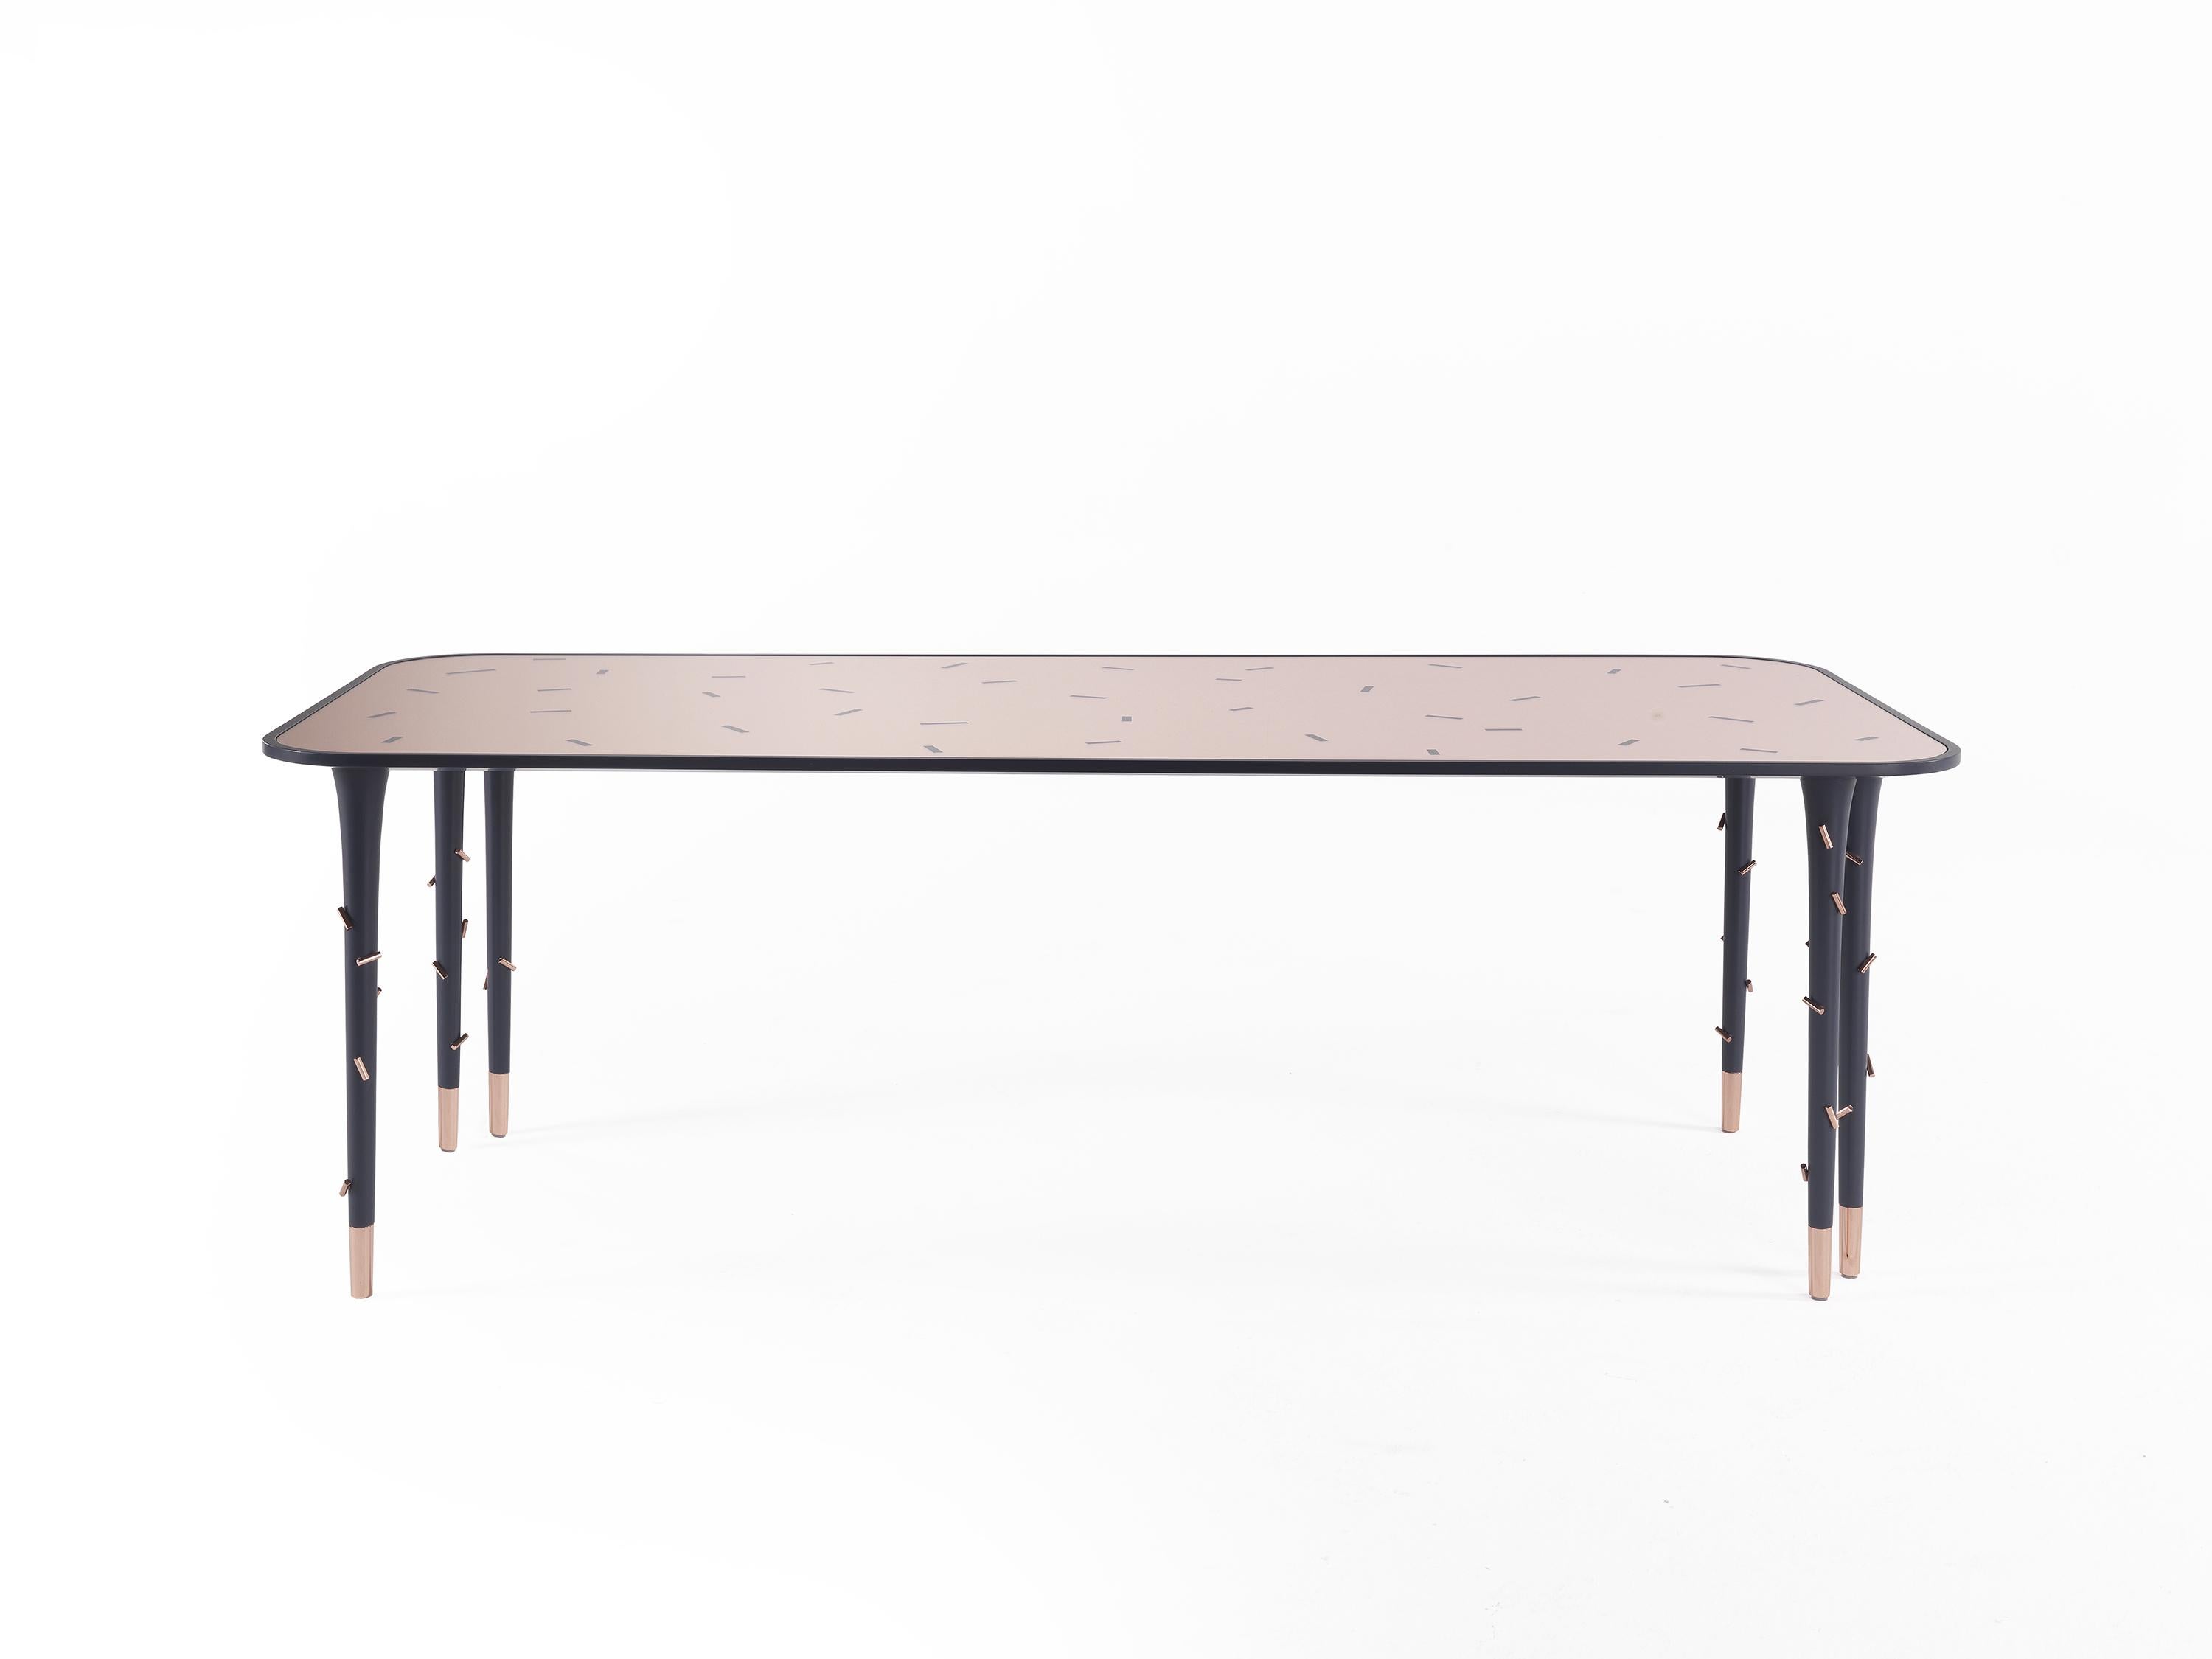 Mettic dining table by Matteo Cibic
Materials: Lacquered wood structure, cylindric applications in metal with polished copper finish, top surface in decorated copper mirror
Dimensions: 70cm x 210cm x 89cm

PLEASE READ CAREFULLY THE UNPACKING AND